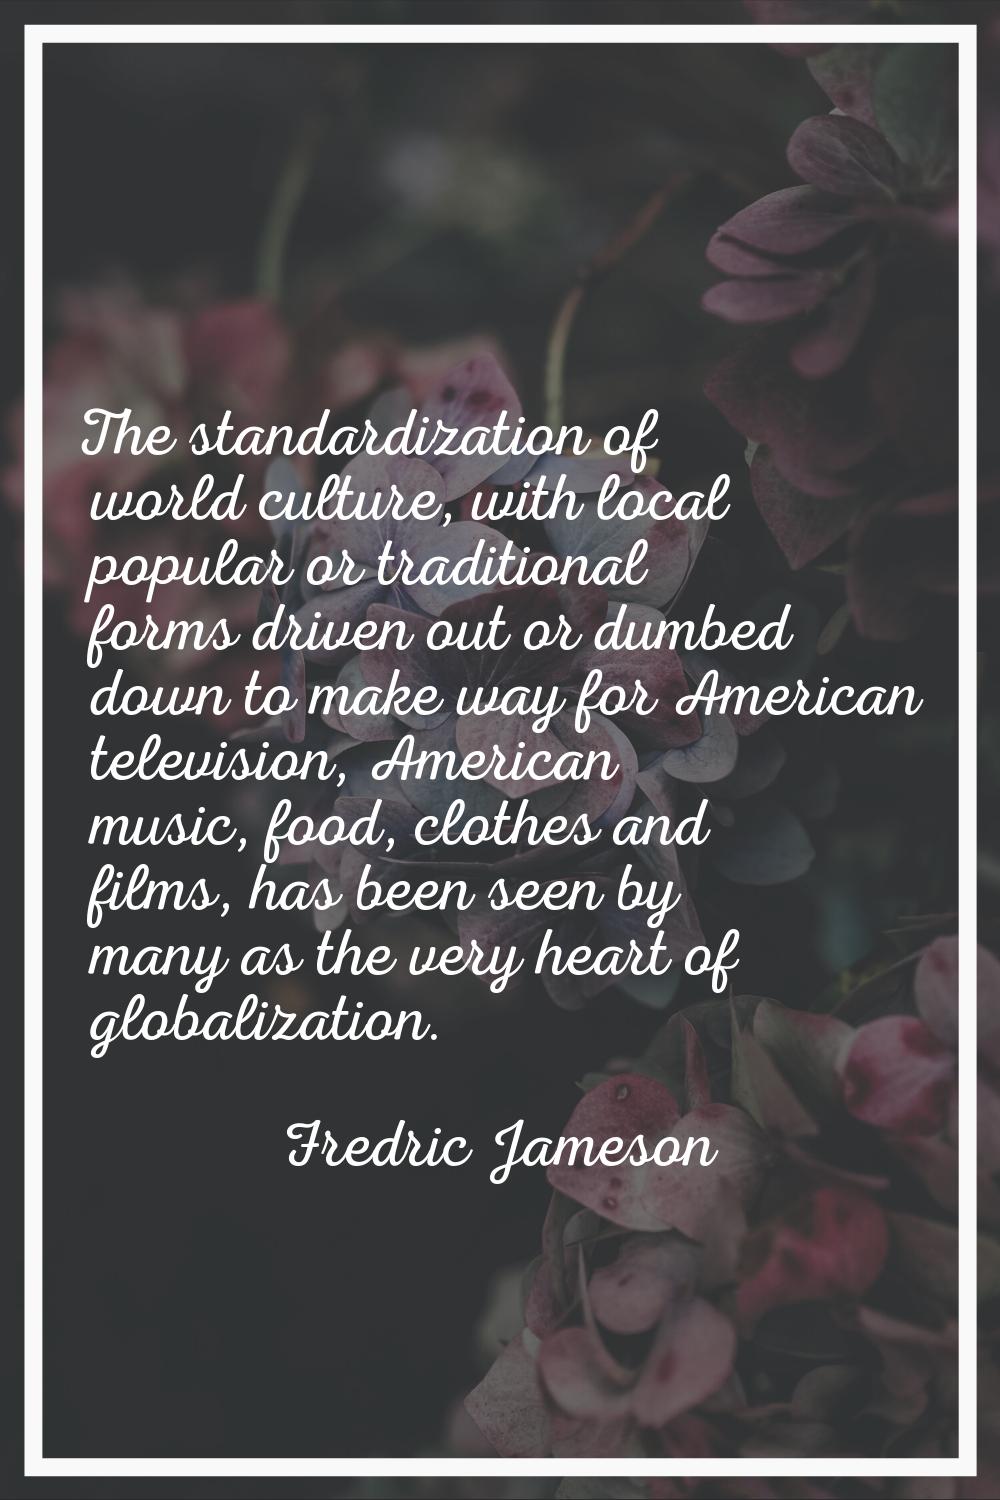 The standardization of world culture, with local popular or traditional forms driven out or dumbed 